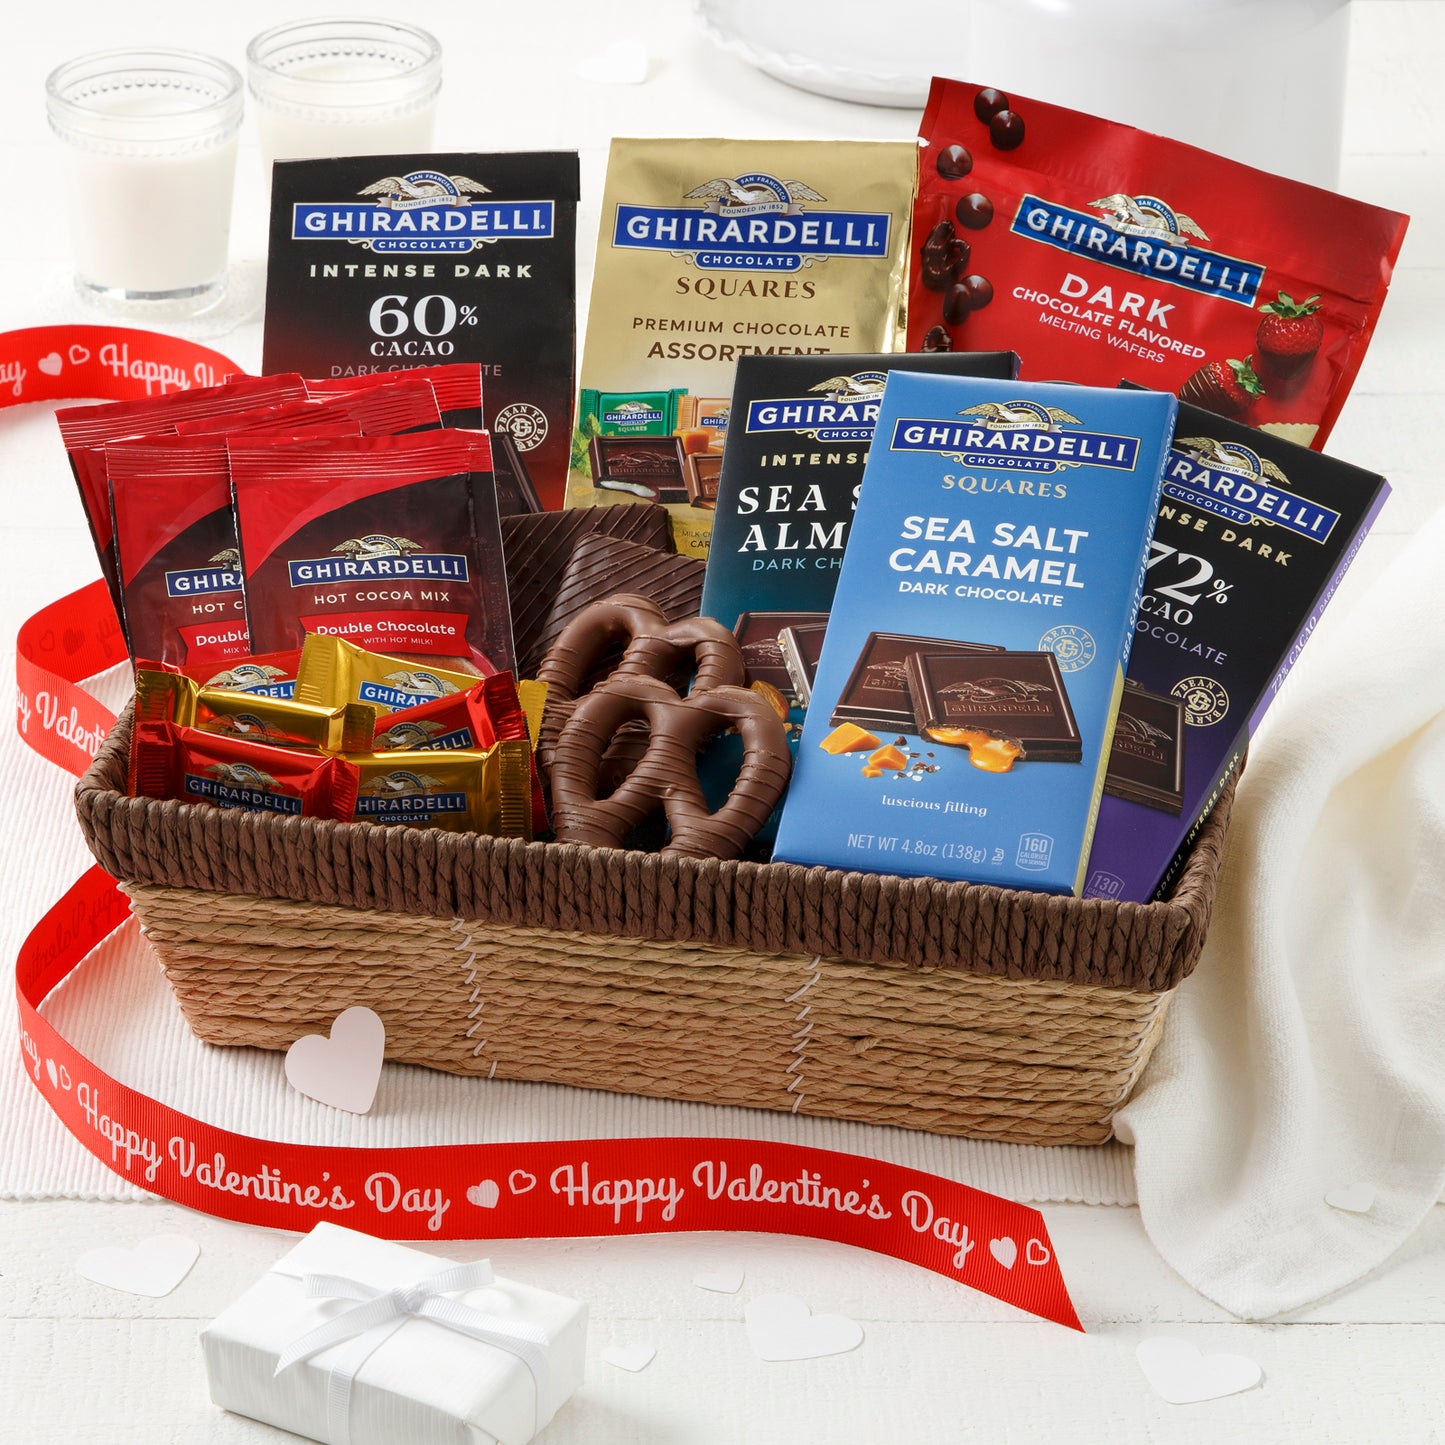 A brown basket filled with an assortment of Ghirardelli chocolates